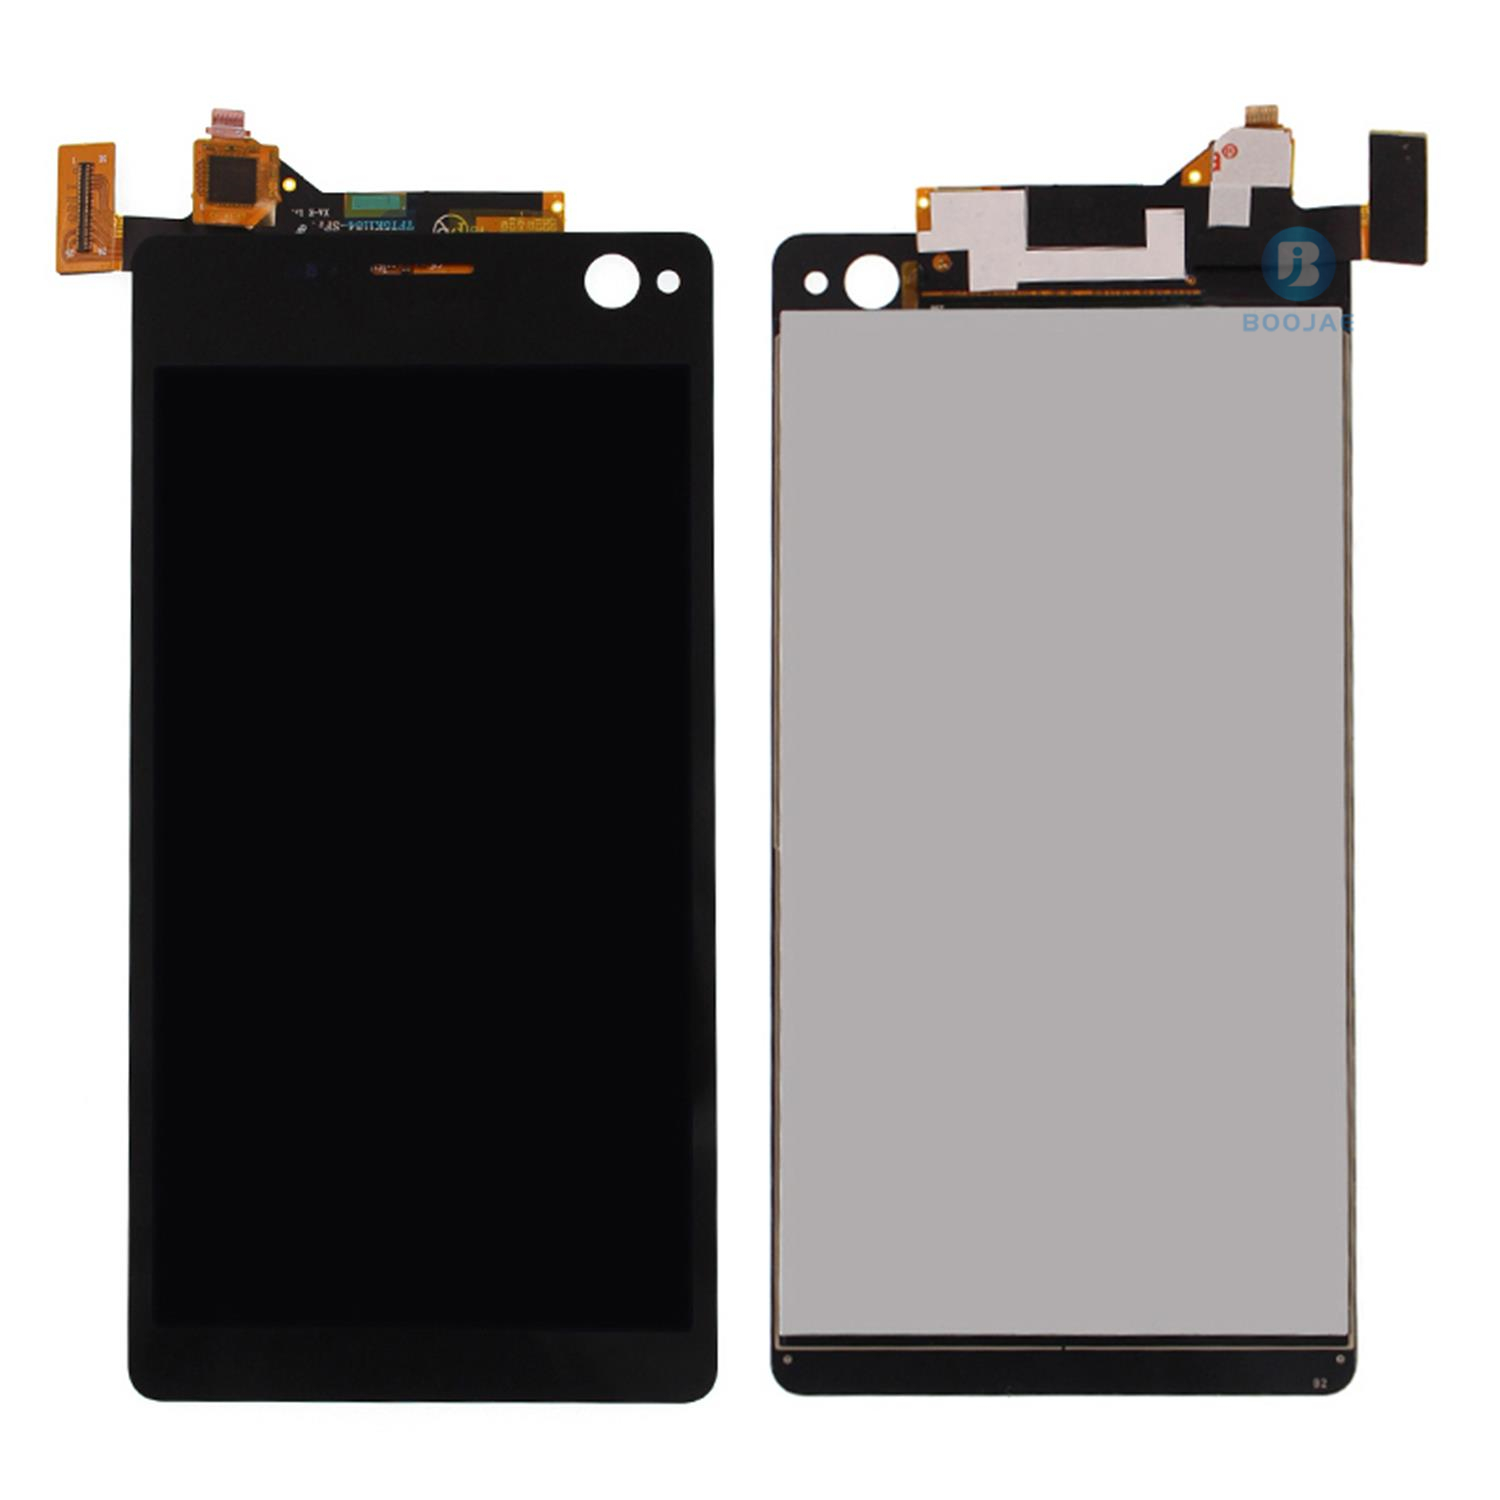 For Sony Xperia C5 LCD Screen Display and Touch Panel Digitizer Assembly Replacement